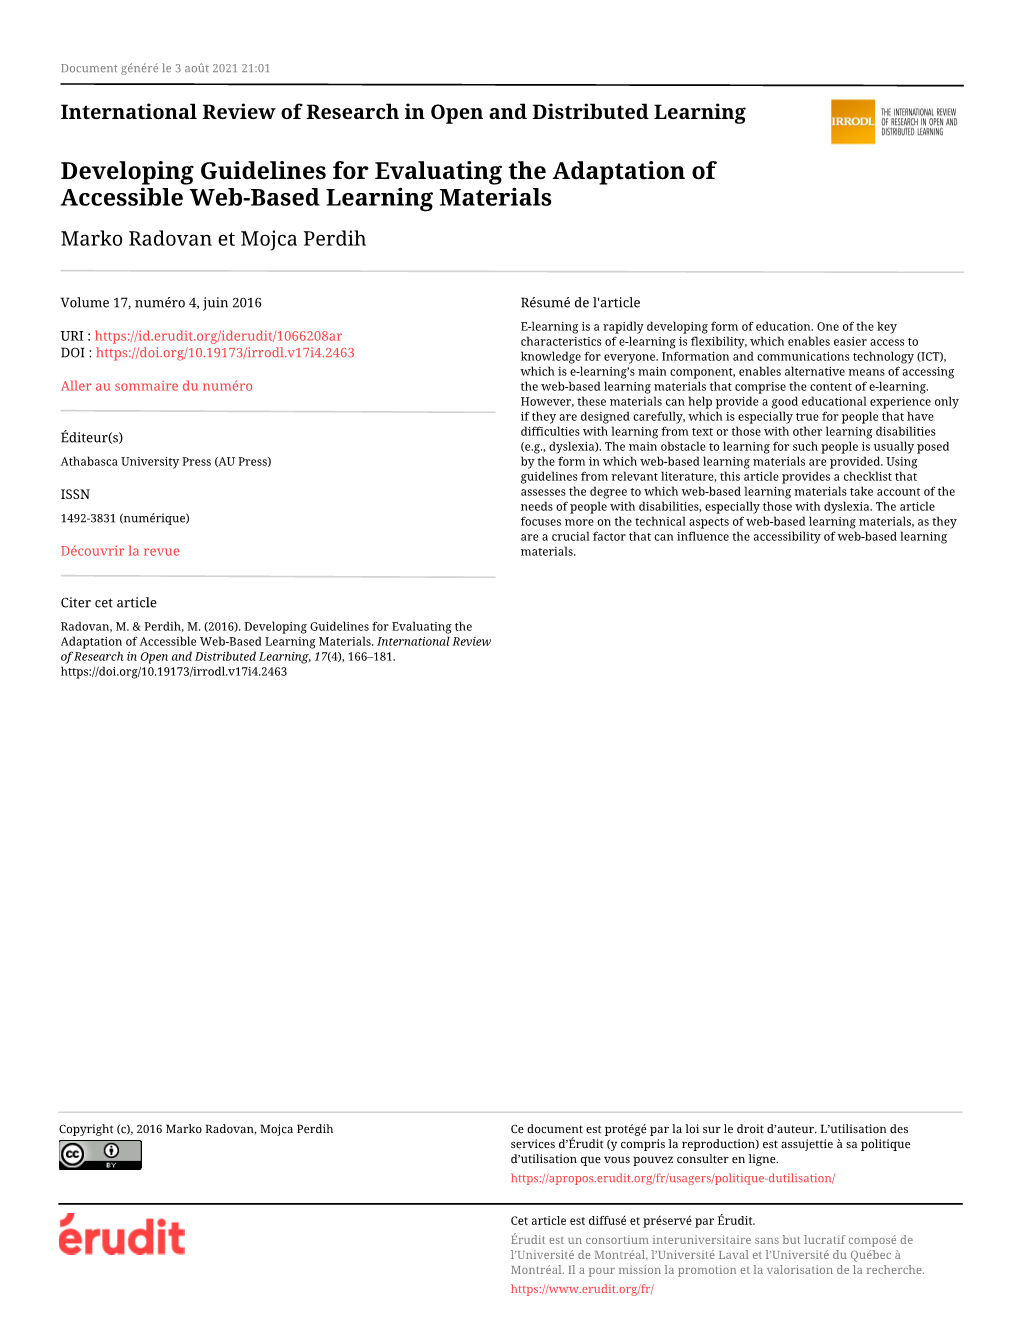 Developing Guidelines for Evaluating the Adaptation of Accessible Web-Based Learning Materials Marko Radovan Et Mojca Perdih